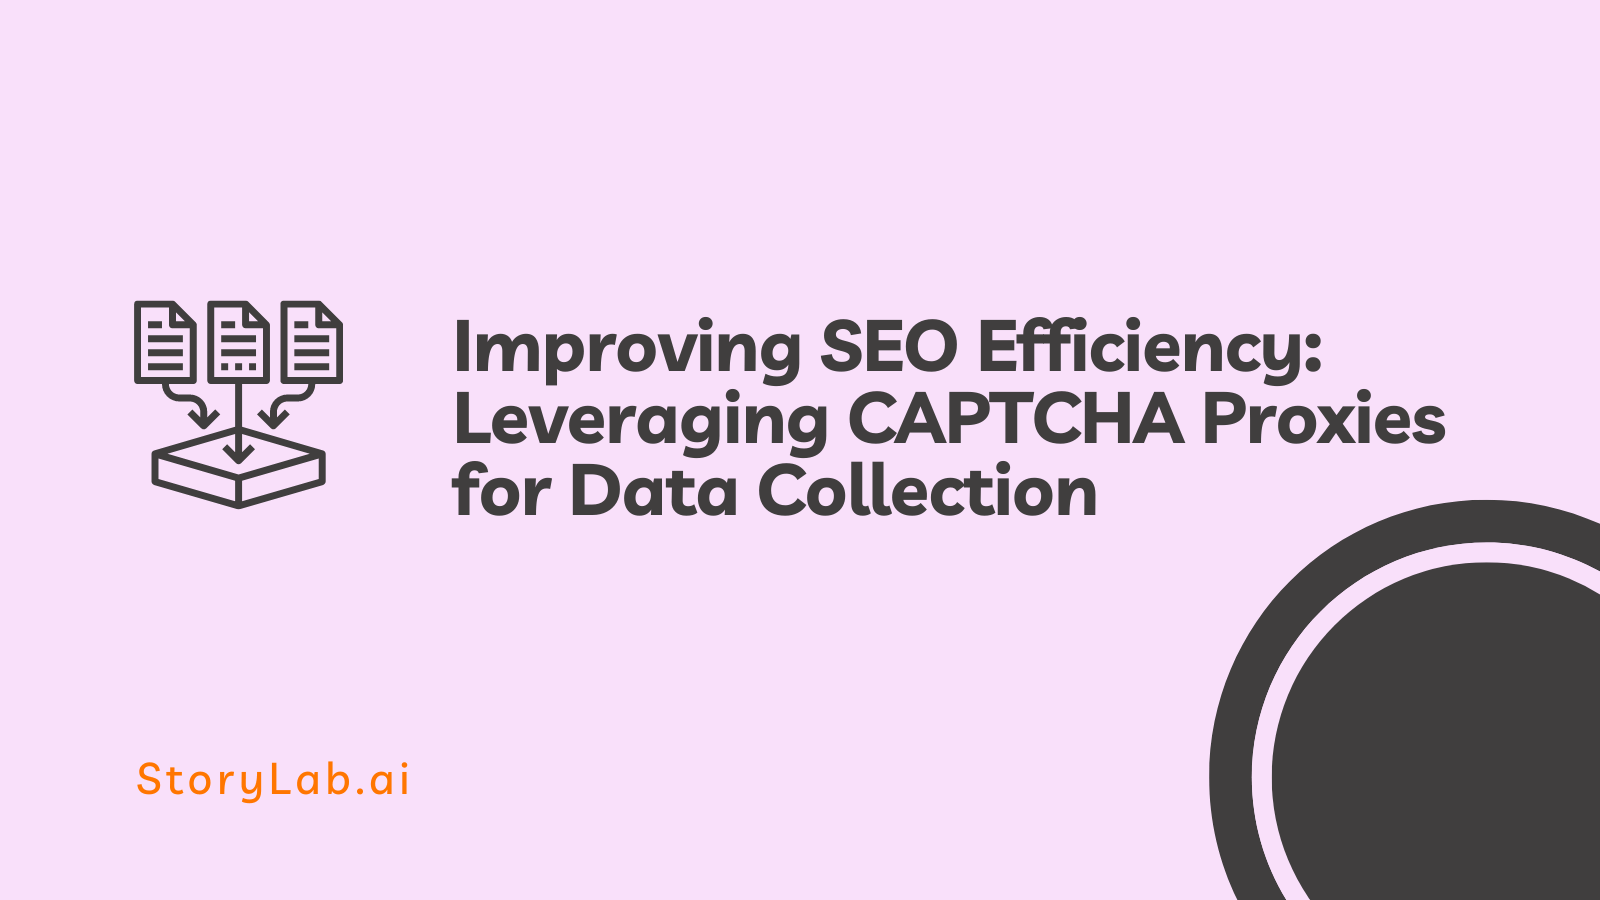 Improving SEO Efficiency: Leveraging CAPTCHA Proxies for Data Collection